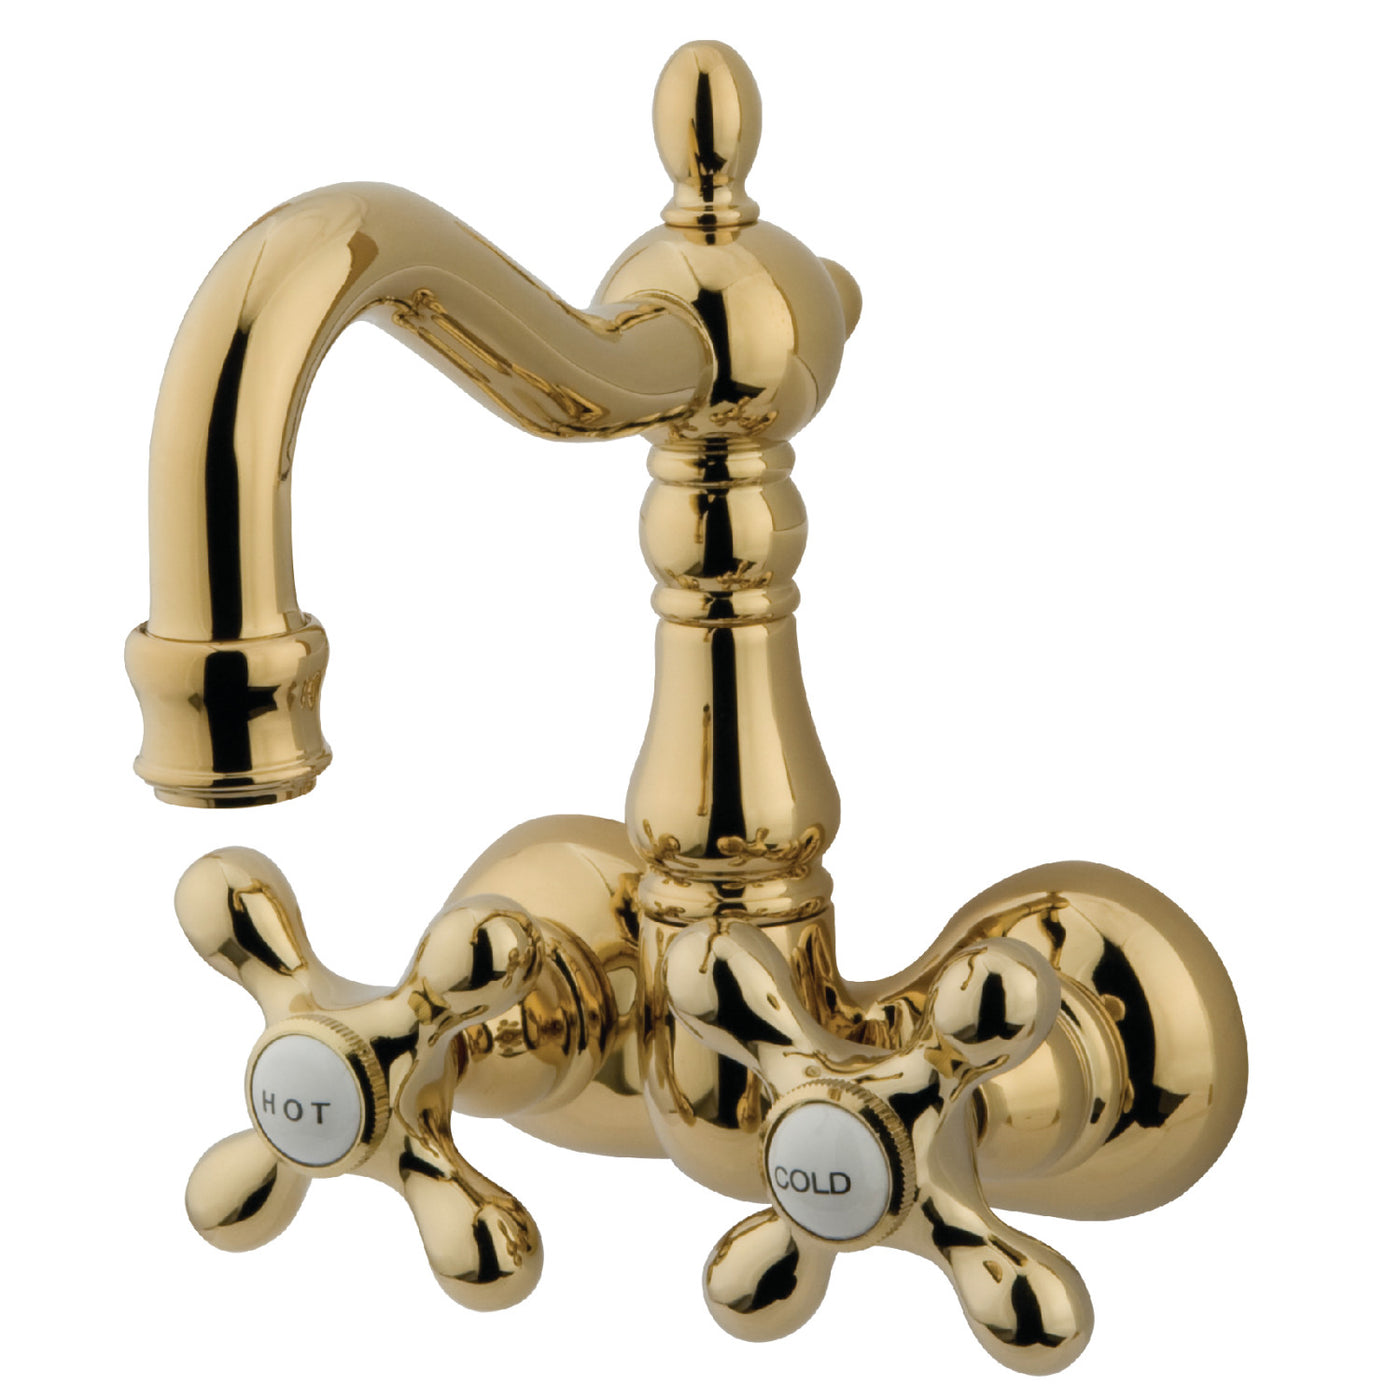 Elements of Design DT10712AX 3-3/8-Inch Wall Mount Tub Faucet, Polished Brass